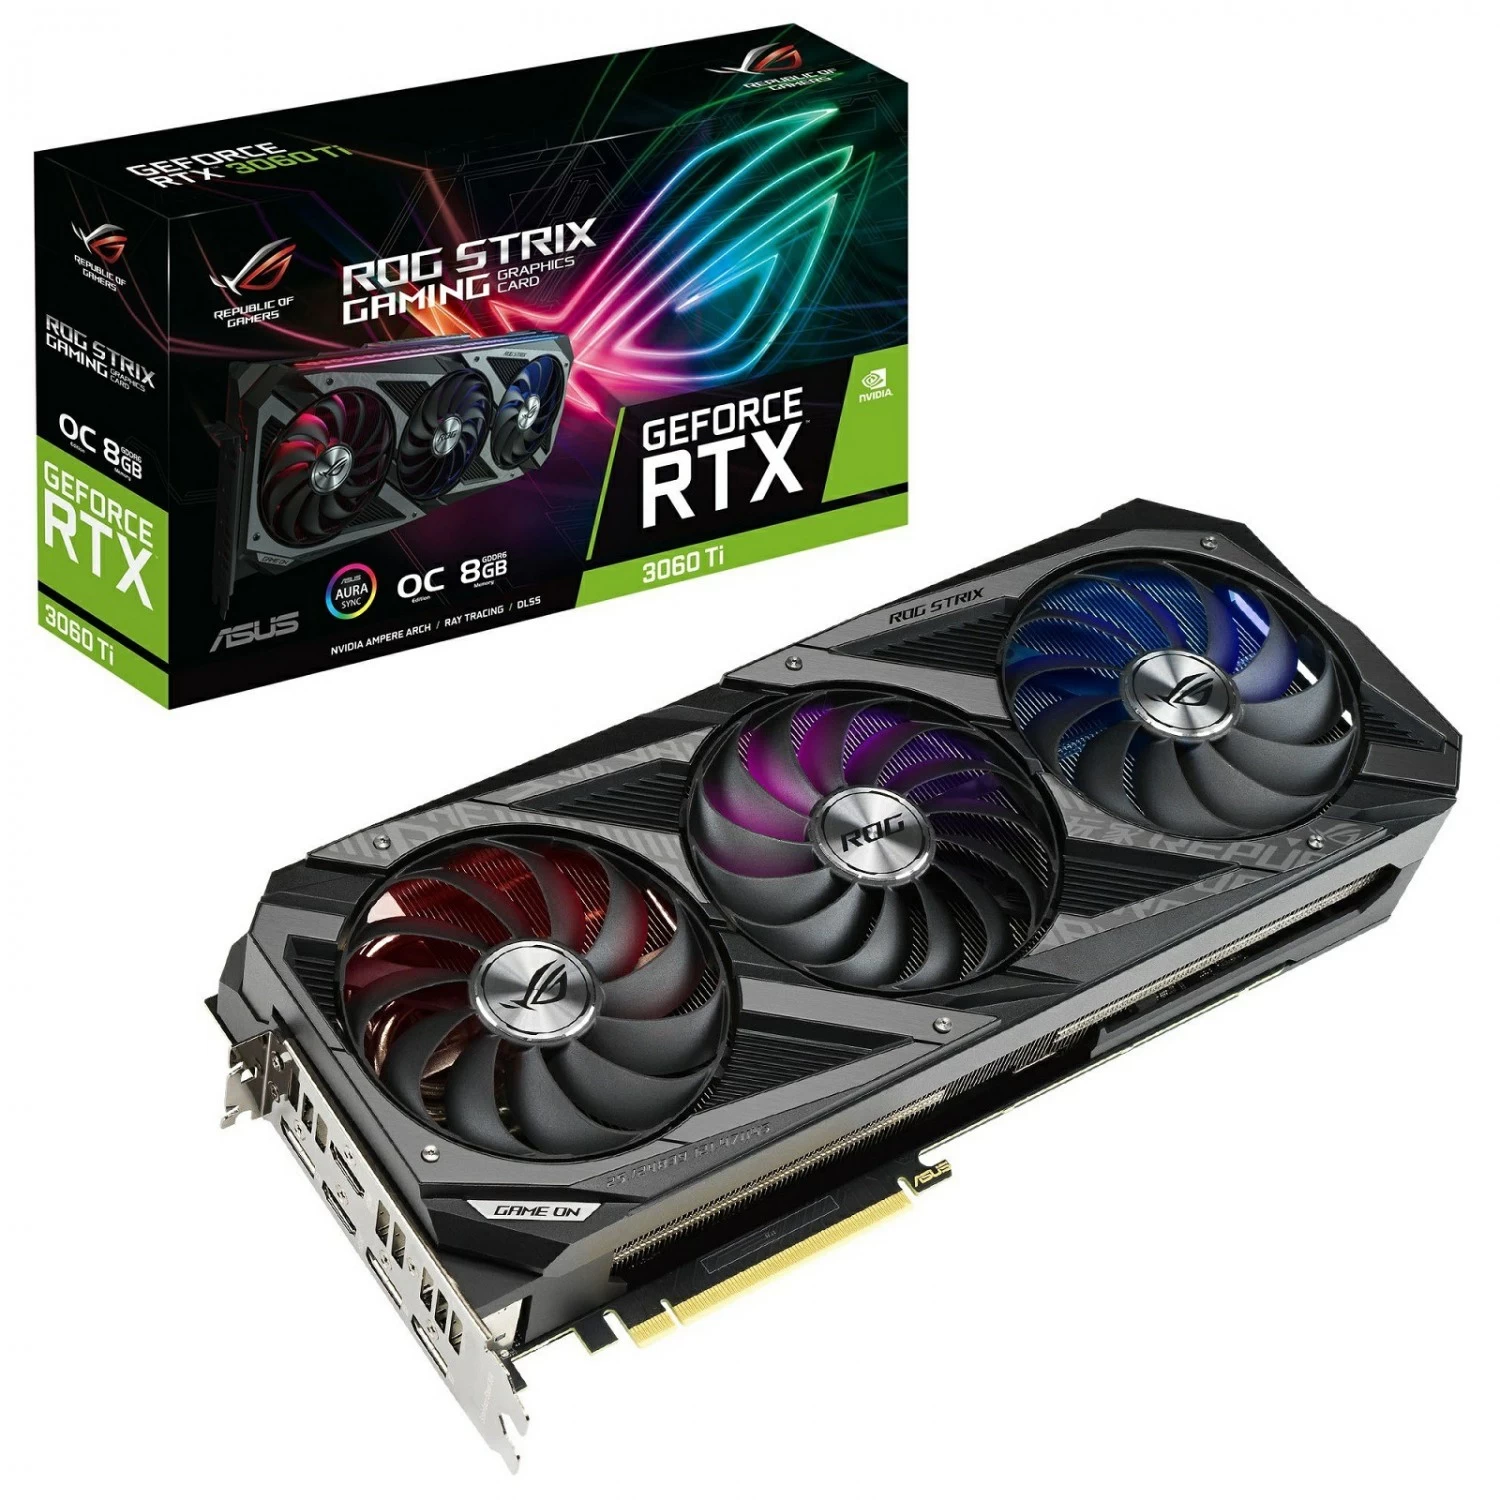 ASUS ROG STRIX RTX 3060 TI OC 8G GAMING Package